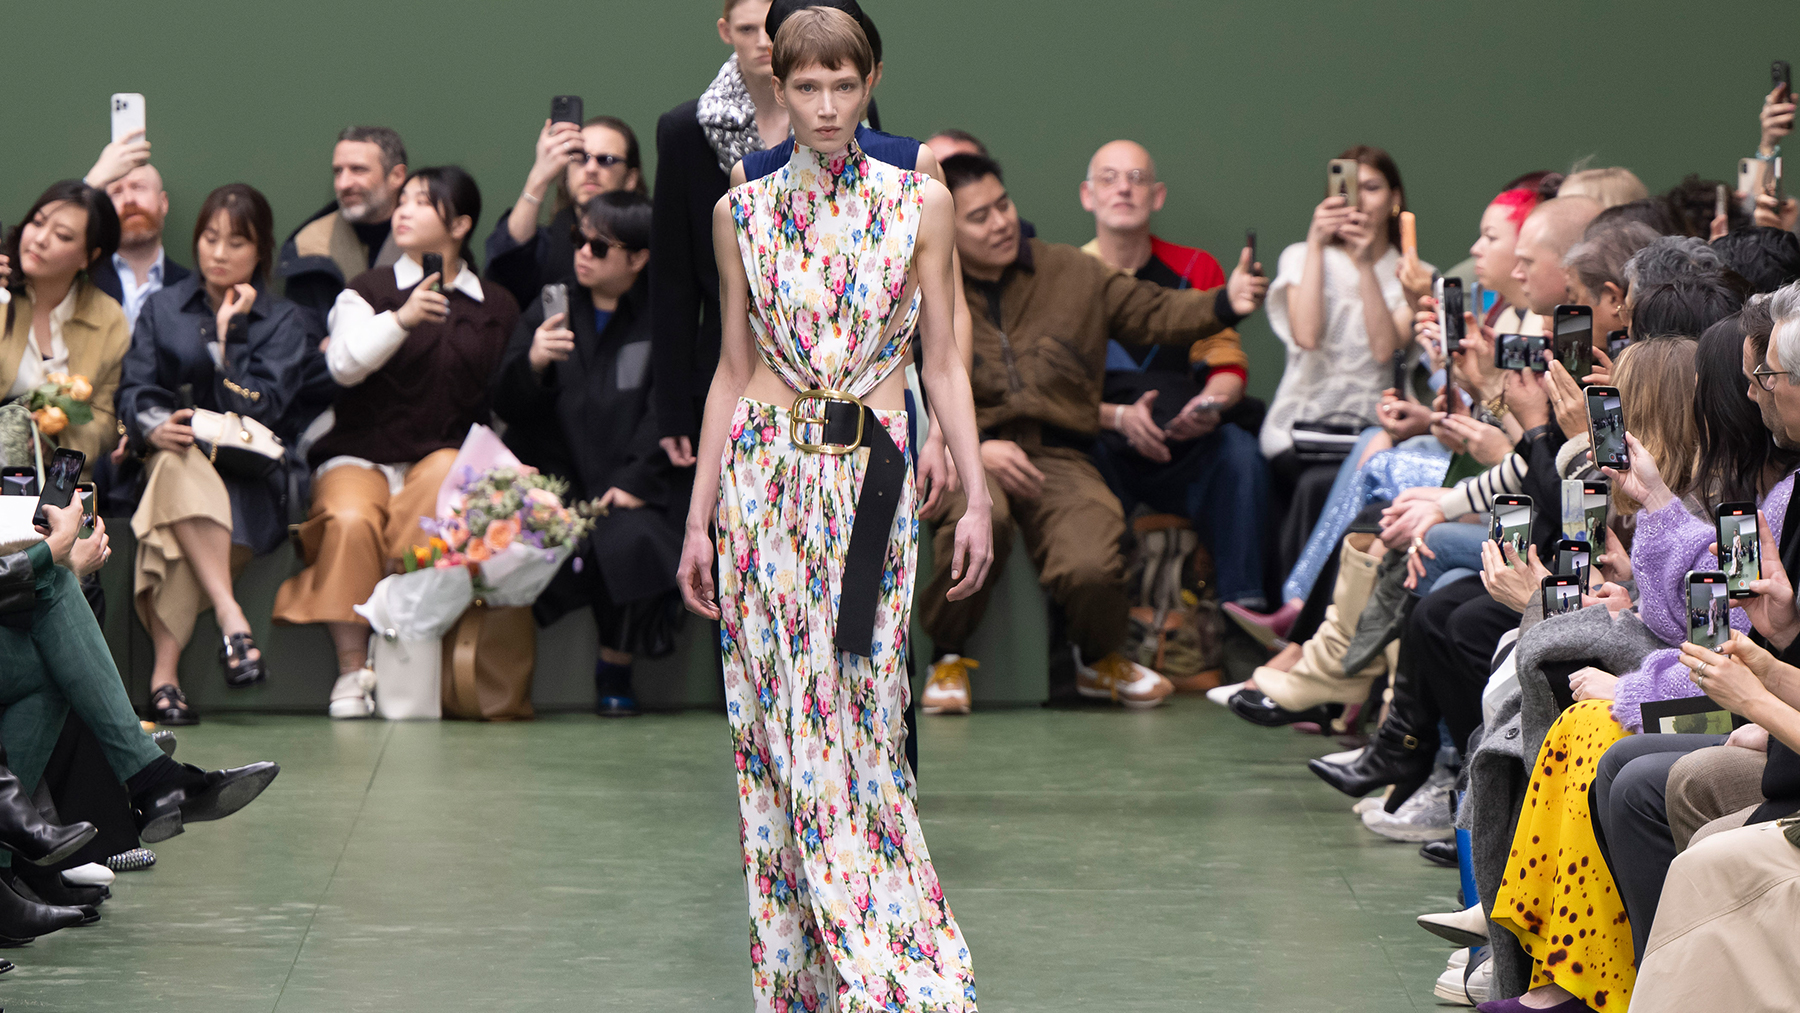 Will this New York Fashion Week signal the end of the body